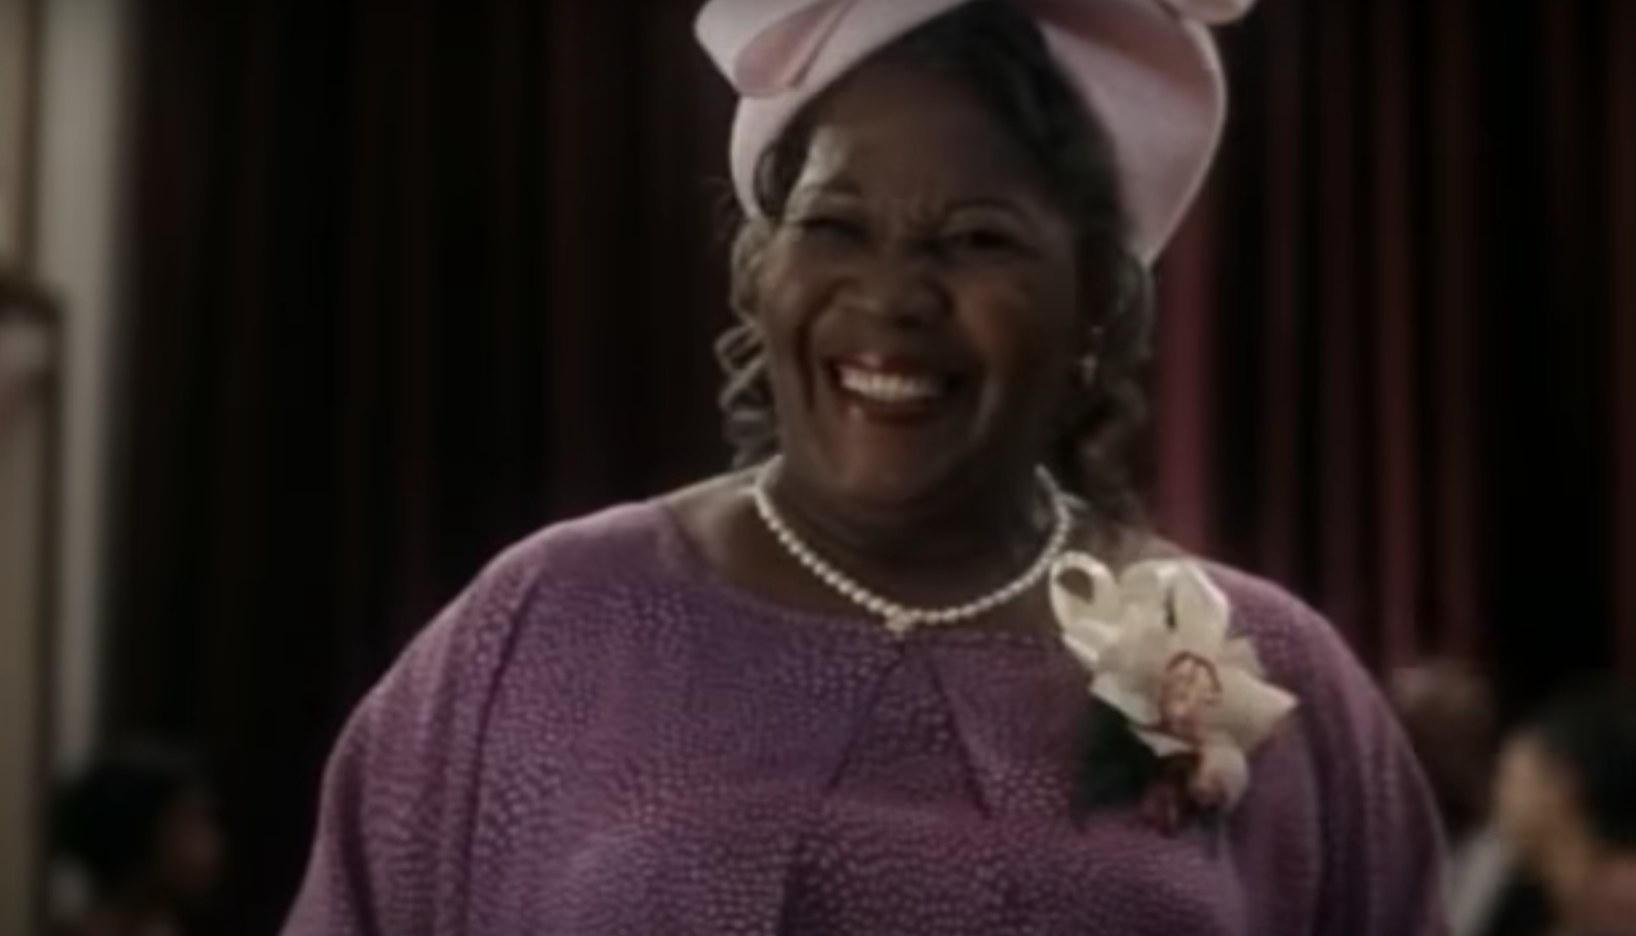 Actress Irma P. Hall wears a purple dress with pearls and a hat. She has on a very big smile